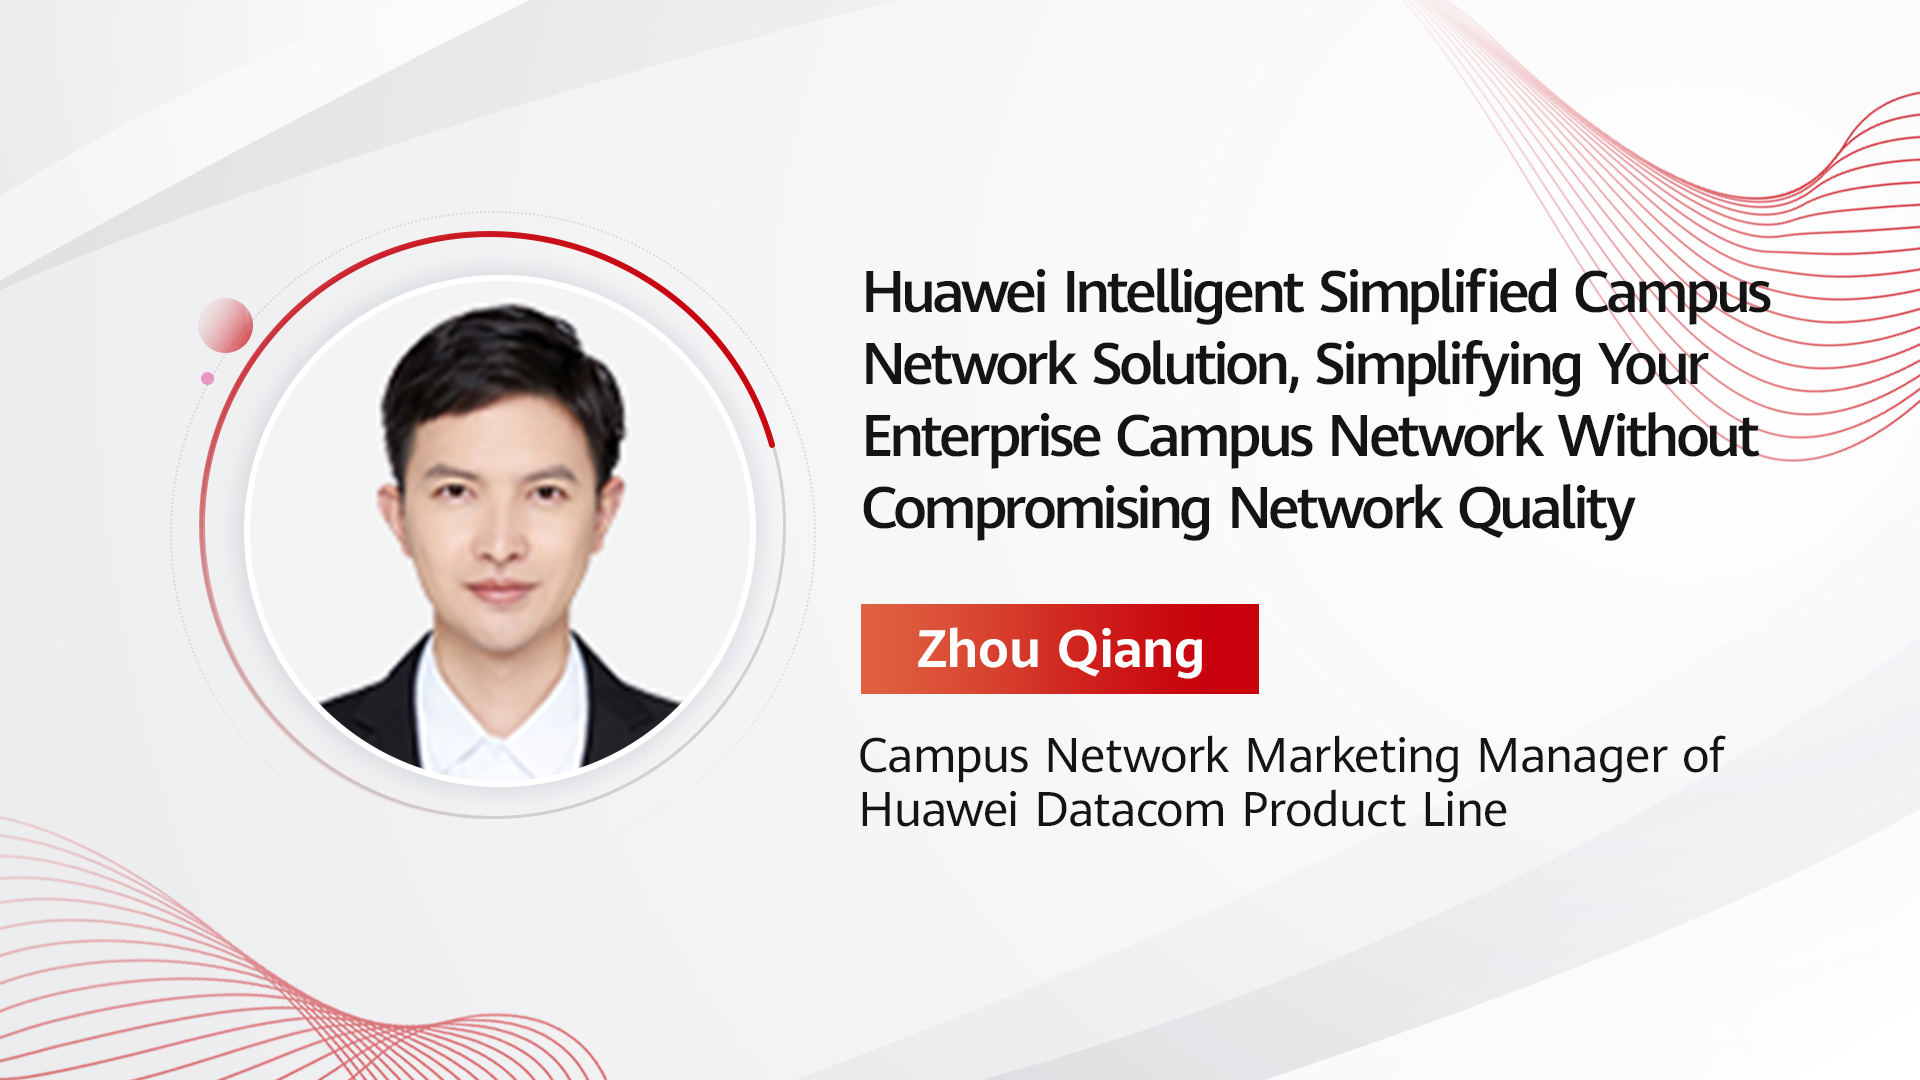 Huawei Intelligent Simplified Campus Network Solution, Simplifying Your Enterprise Campus Network Without Compromising Network Quality